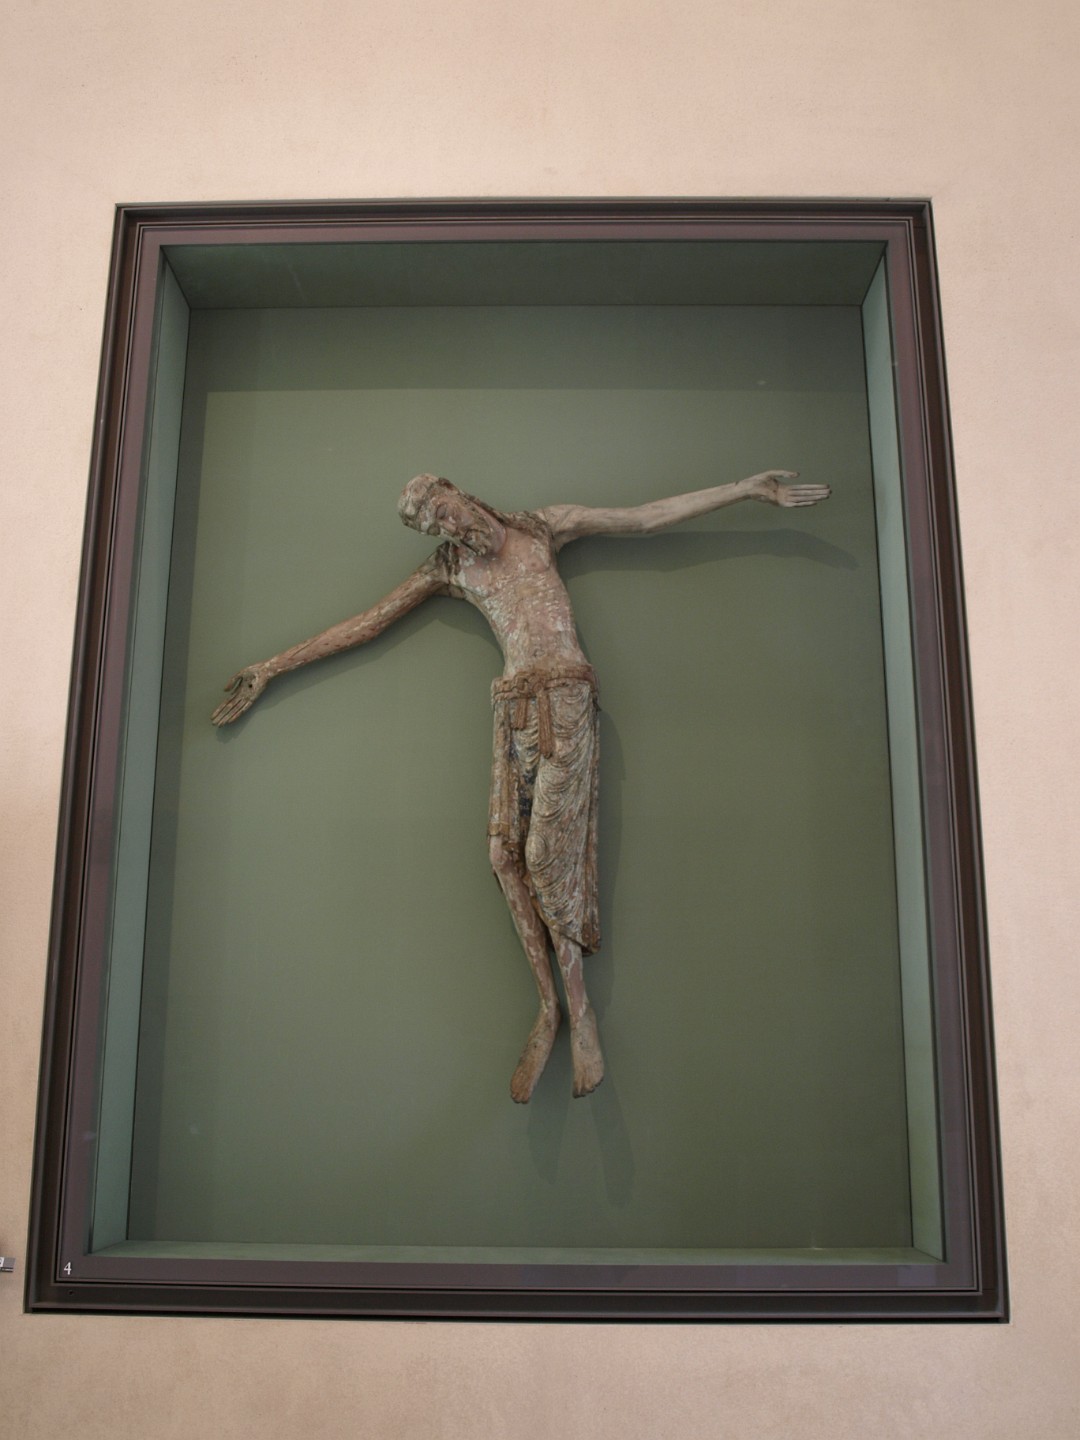 A 12th Century Christ Detatched From the Cross